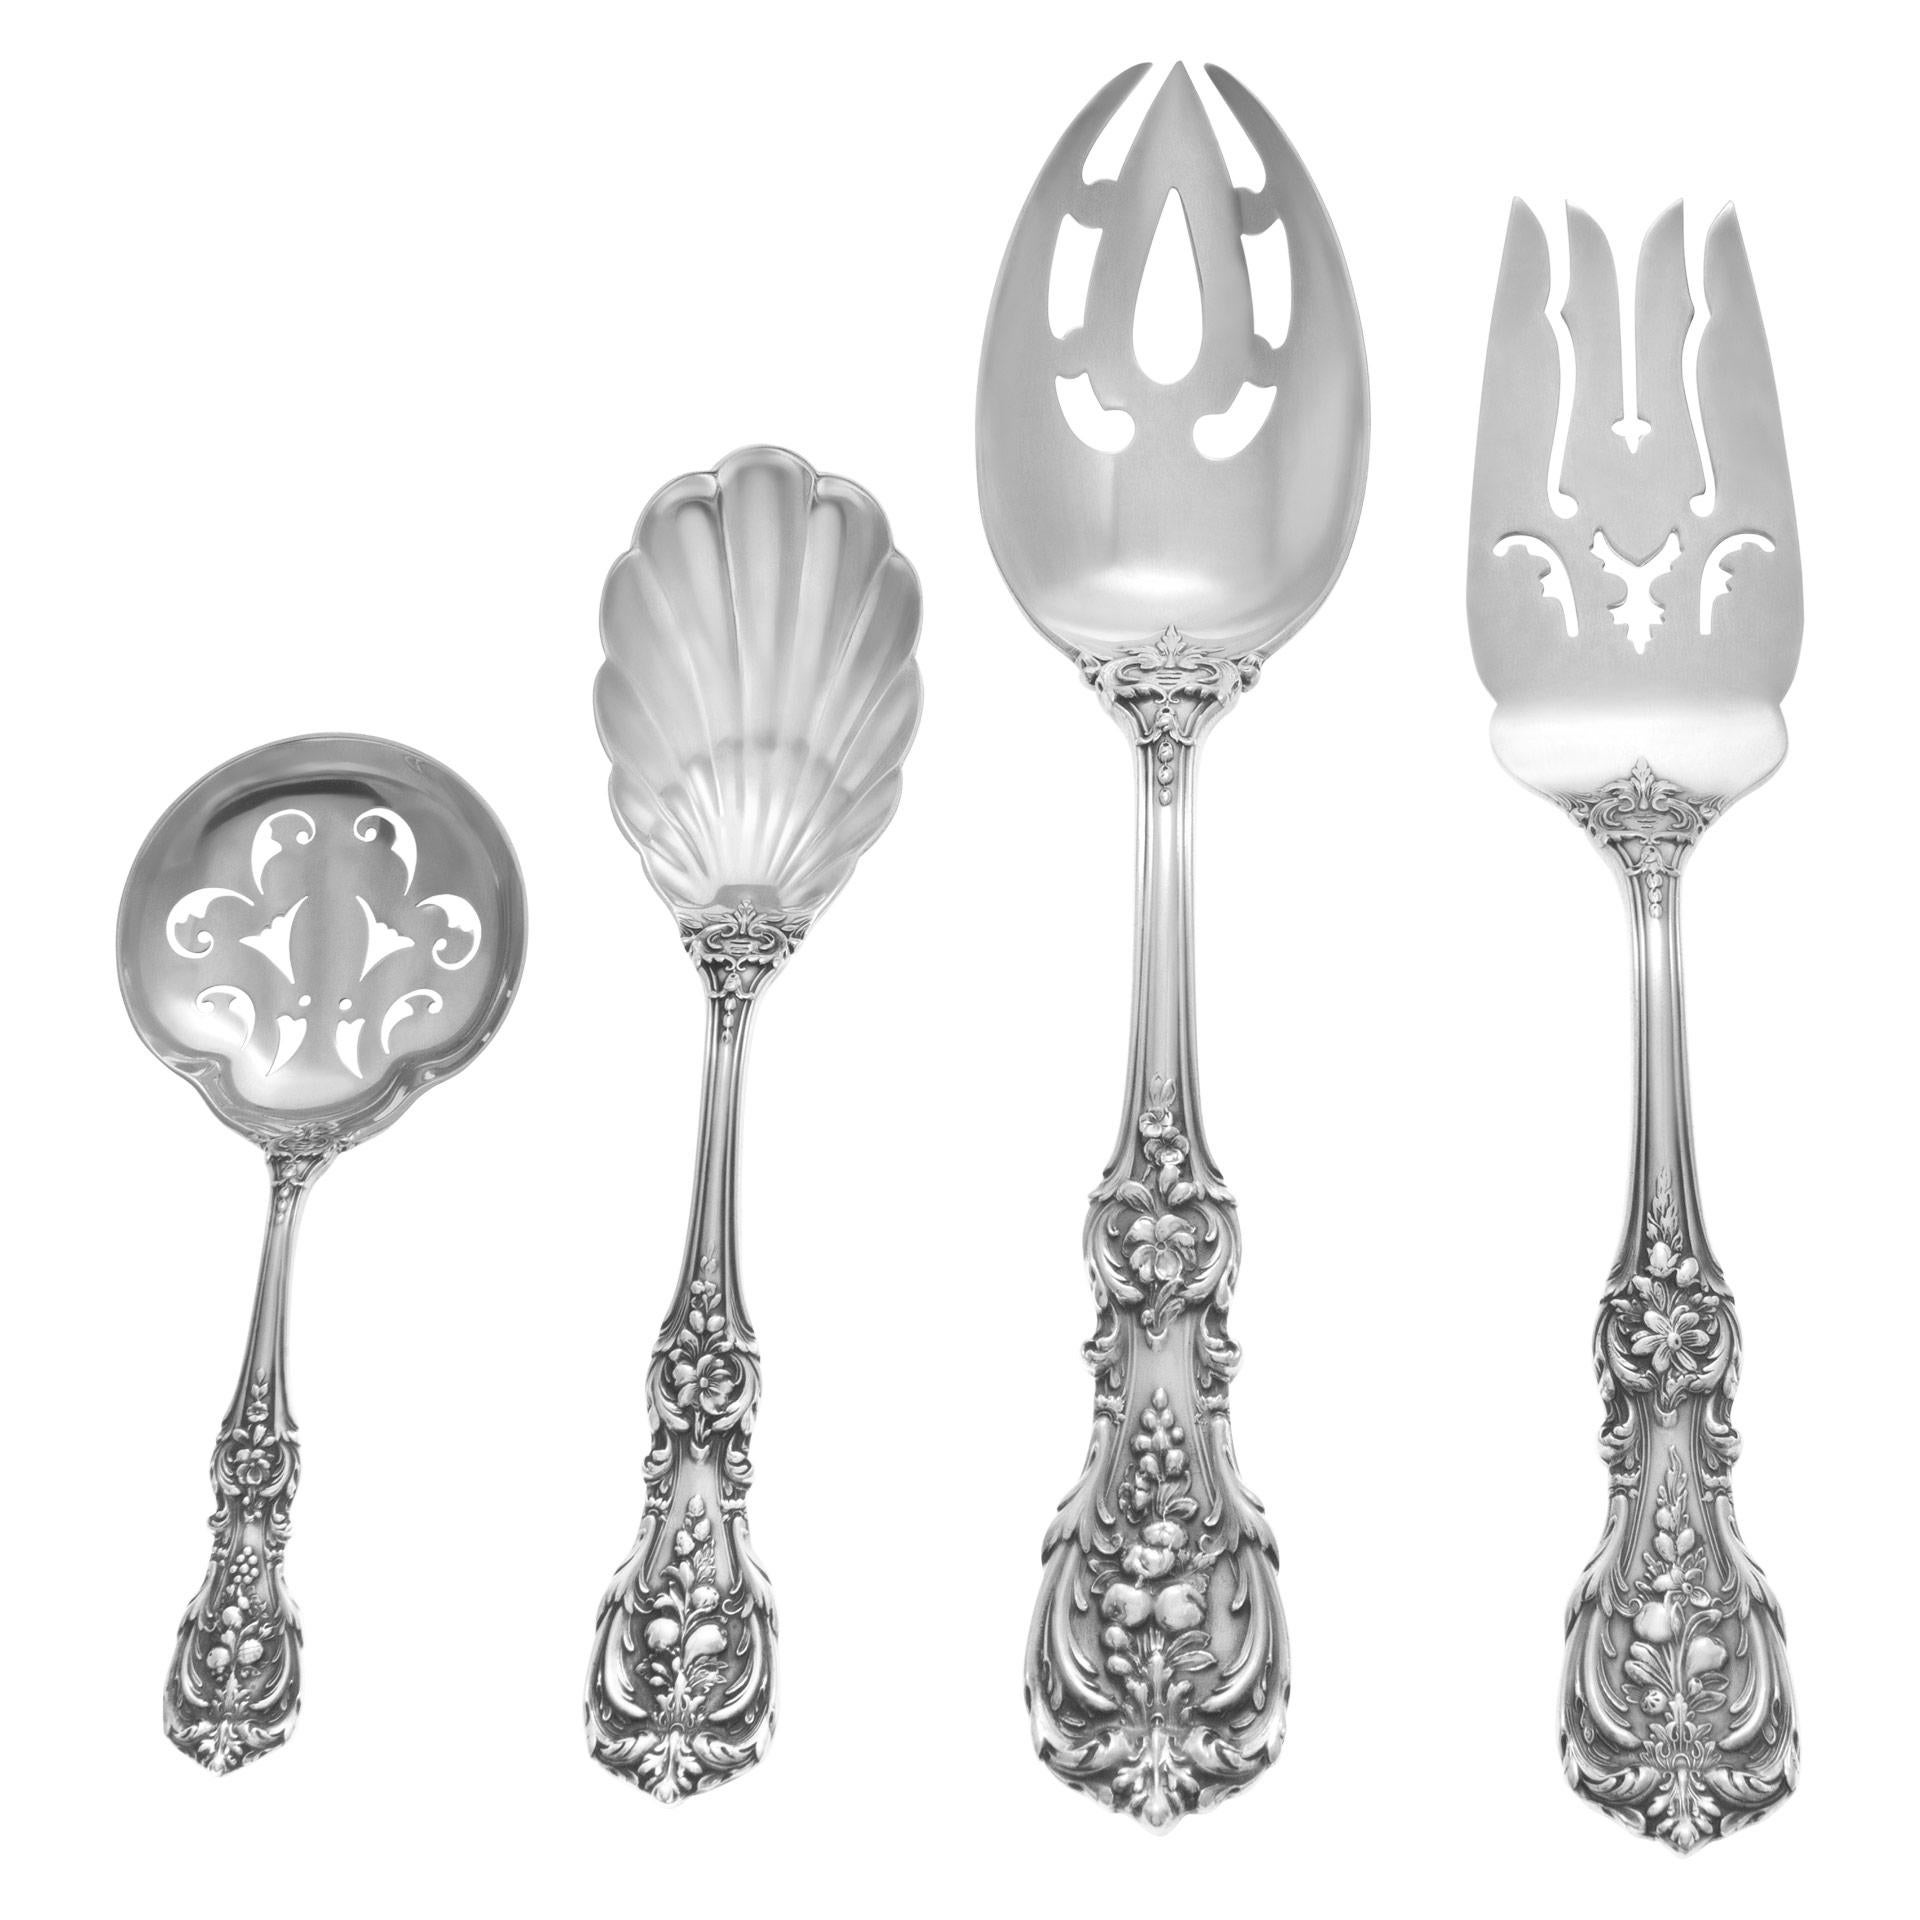 reed and barton 18th century sterling silver flatware